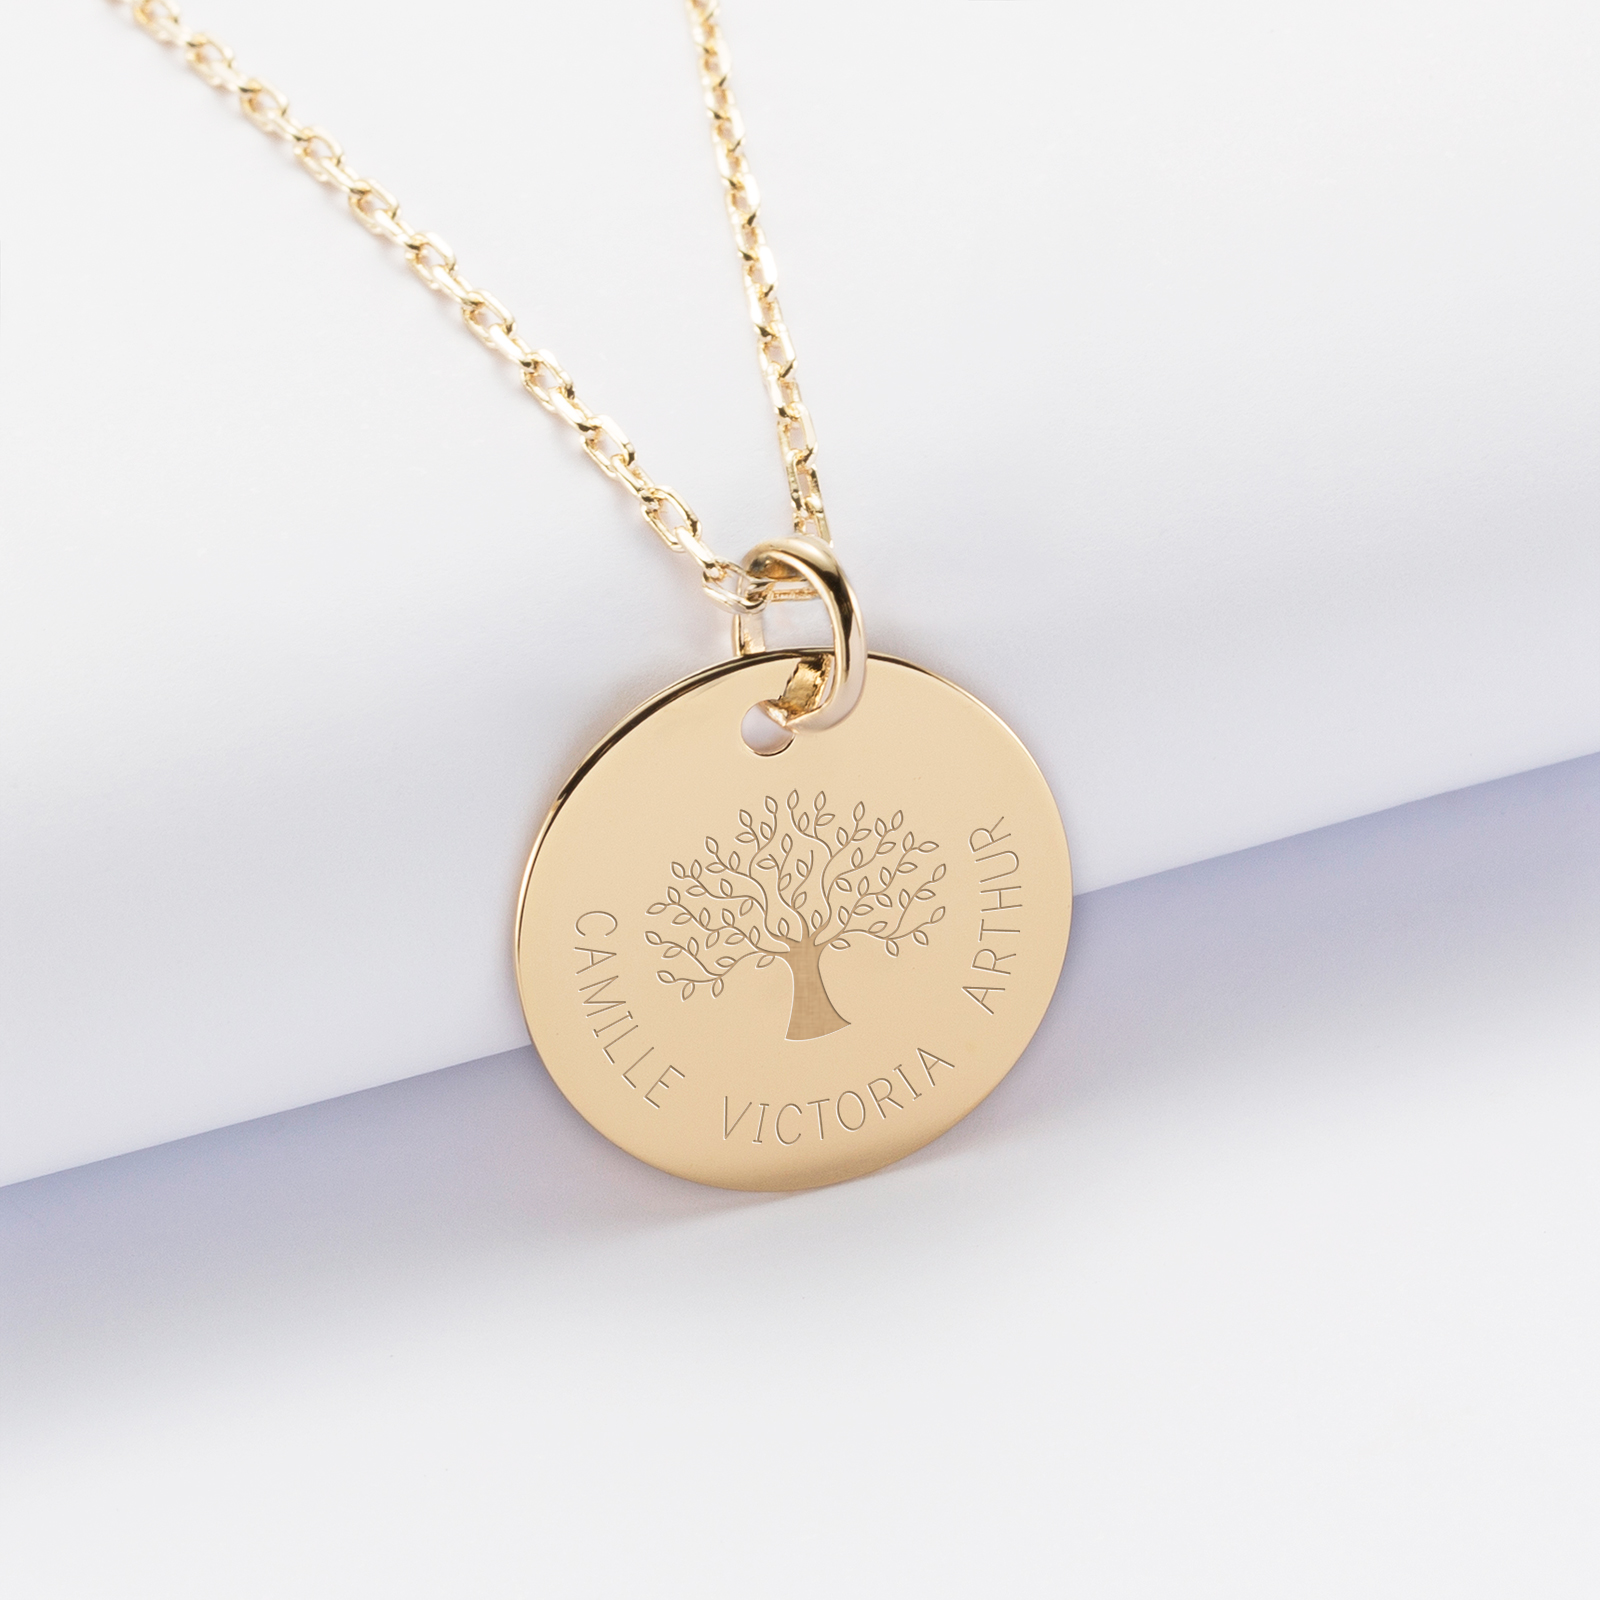 Personalised engraved gold plated 19mm medallion pendant - Tree of Life special edition 1